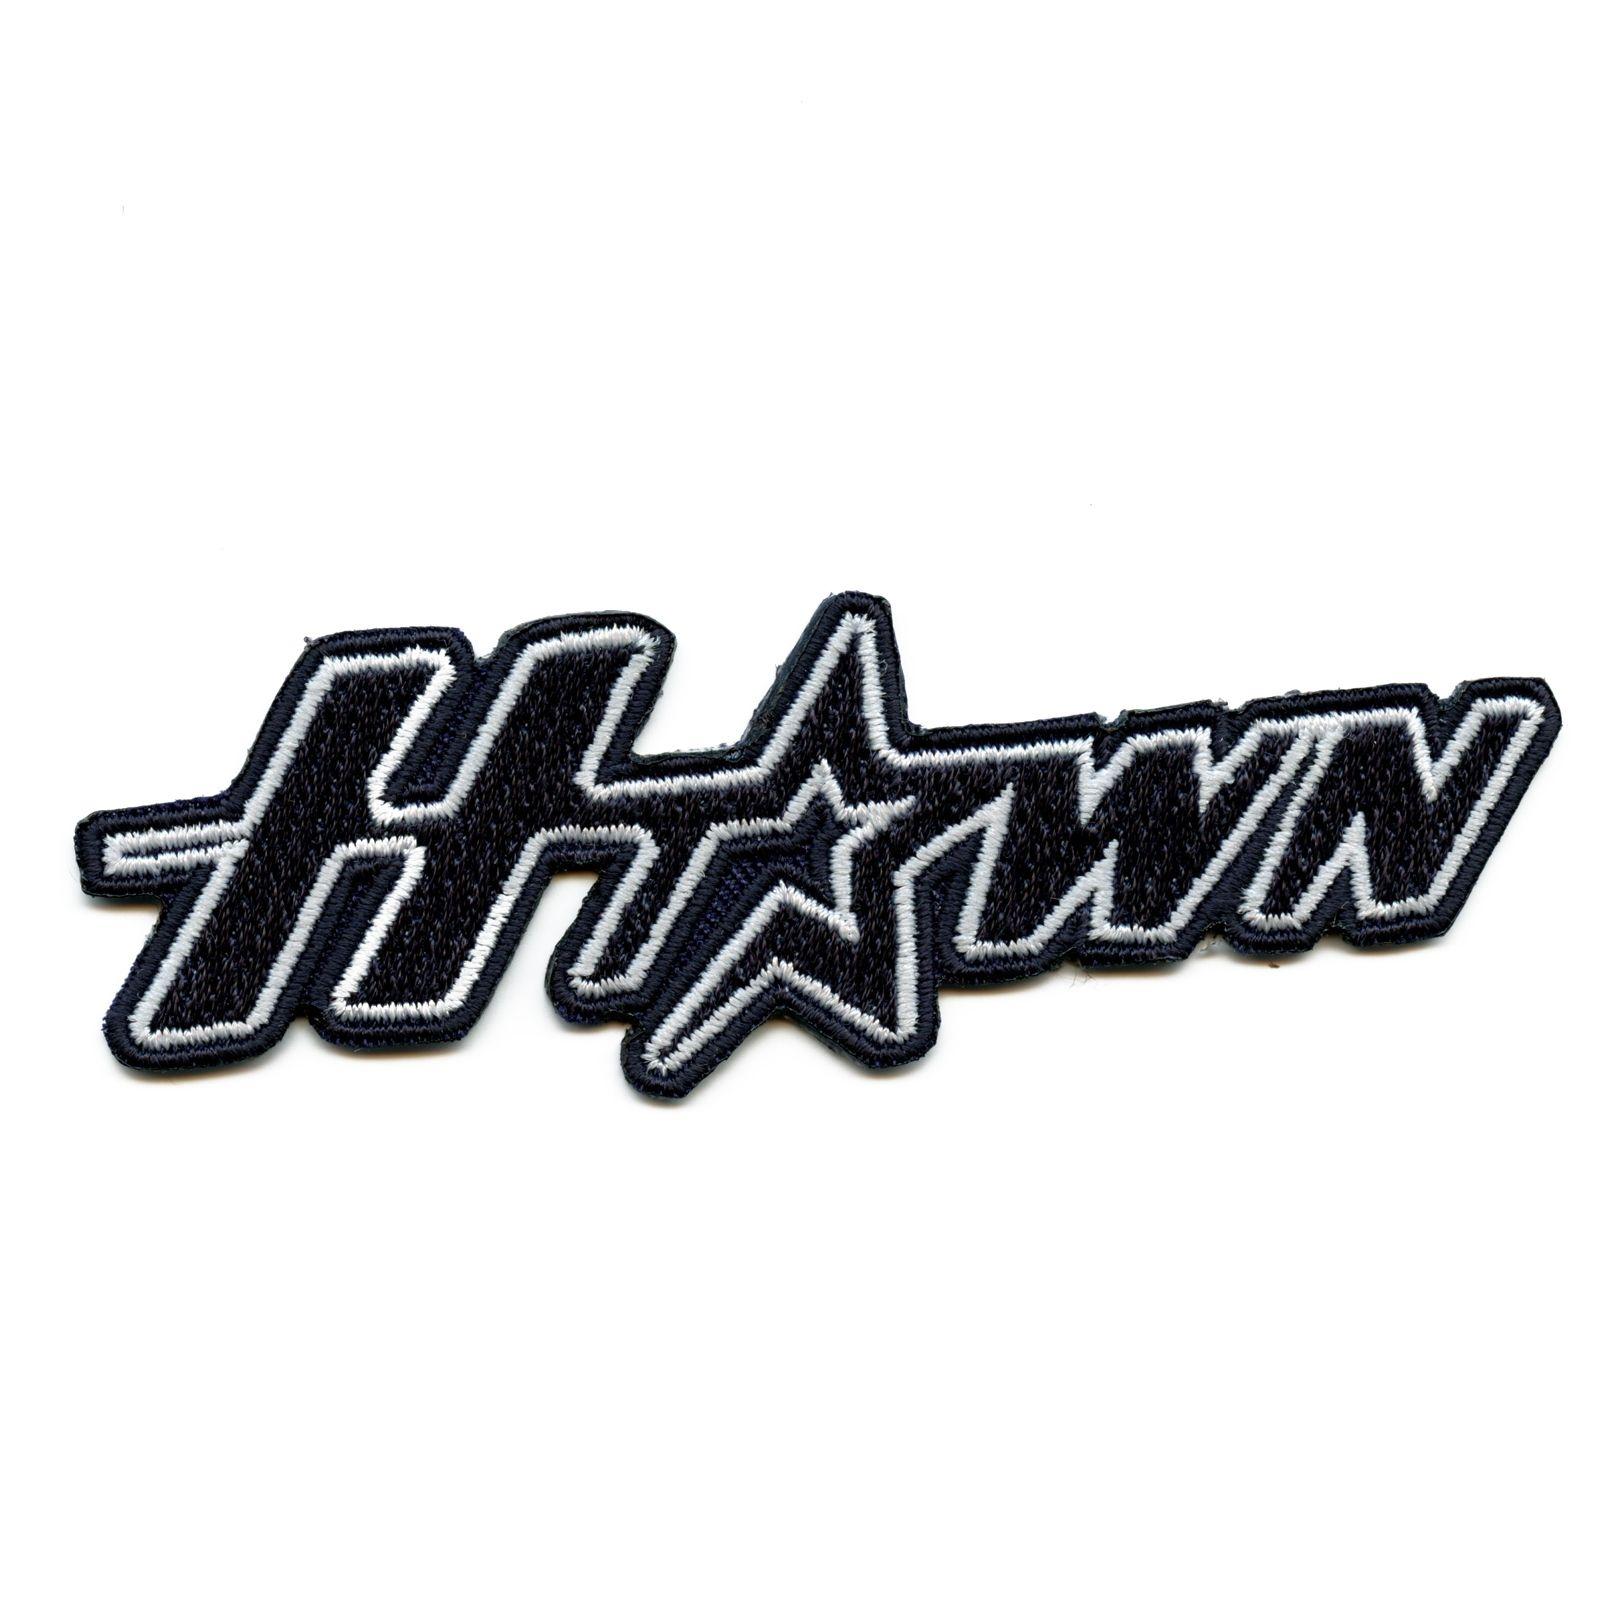 H-Town Logo - Details about H-Town Houston Baseball Team Parody Logo Embroidered Iron On  Patch